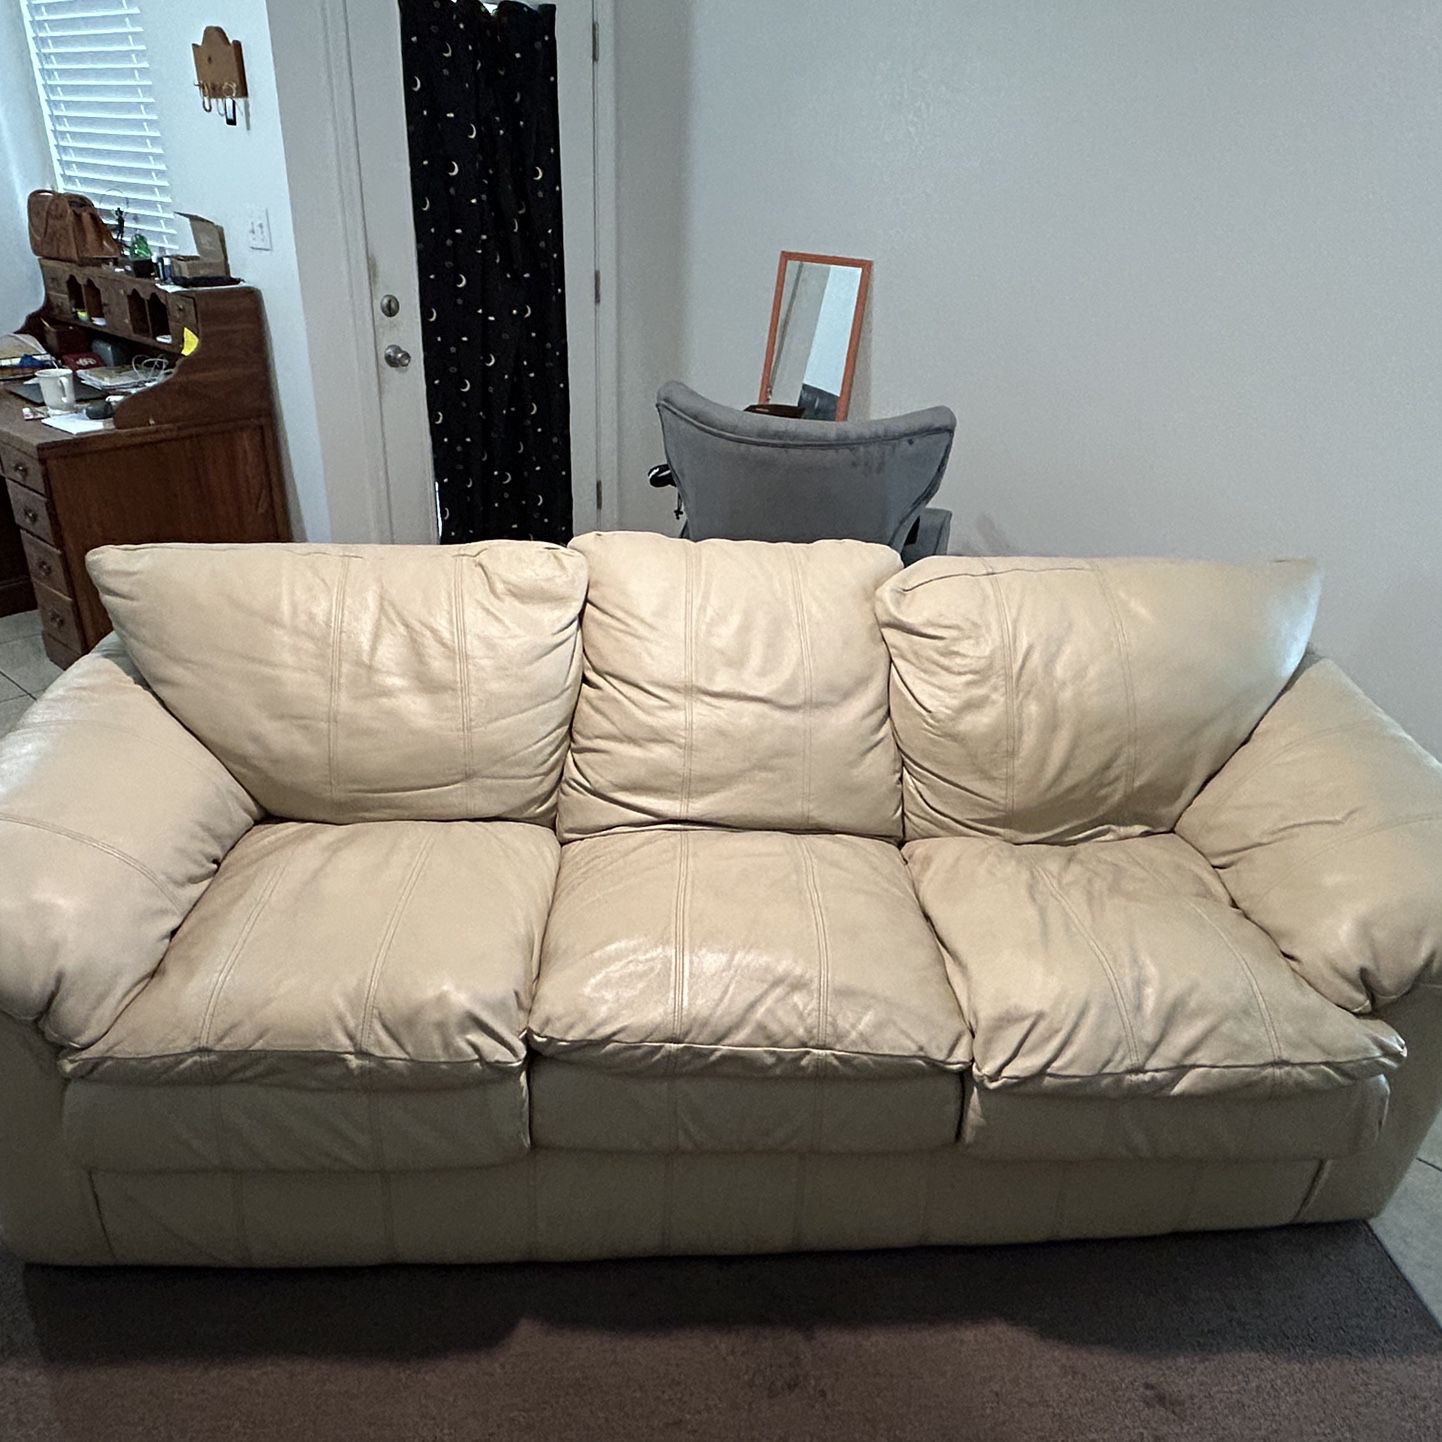 Leather Couch - 3 Seats, High Quality, Made In USA